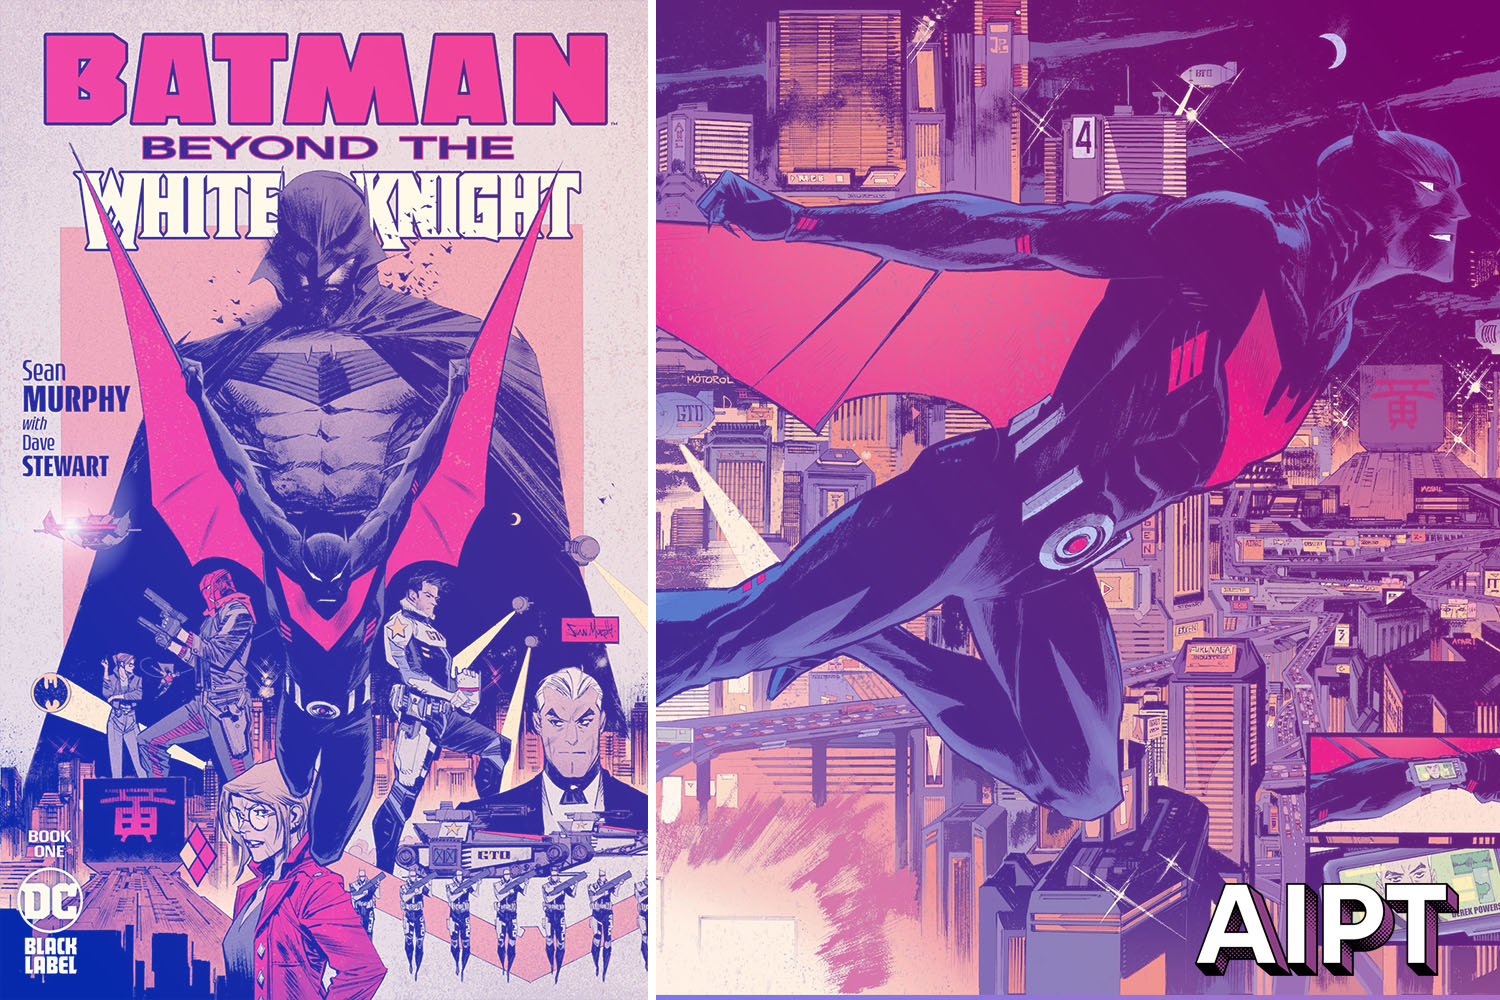 Sean Murphy returns with 'Batman: Beyond the White Knight' #1 in March